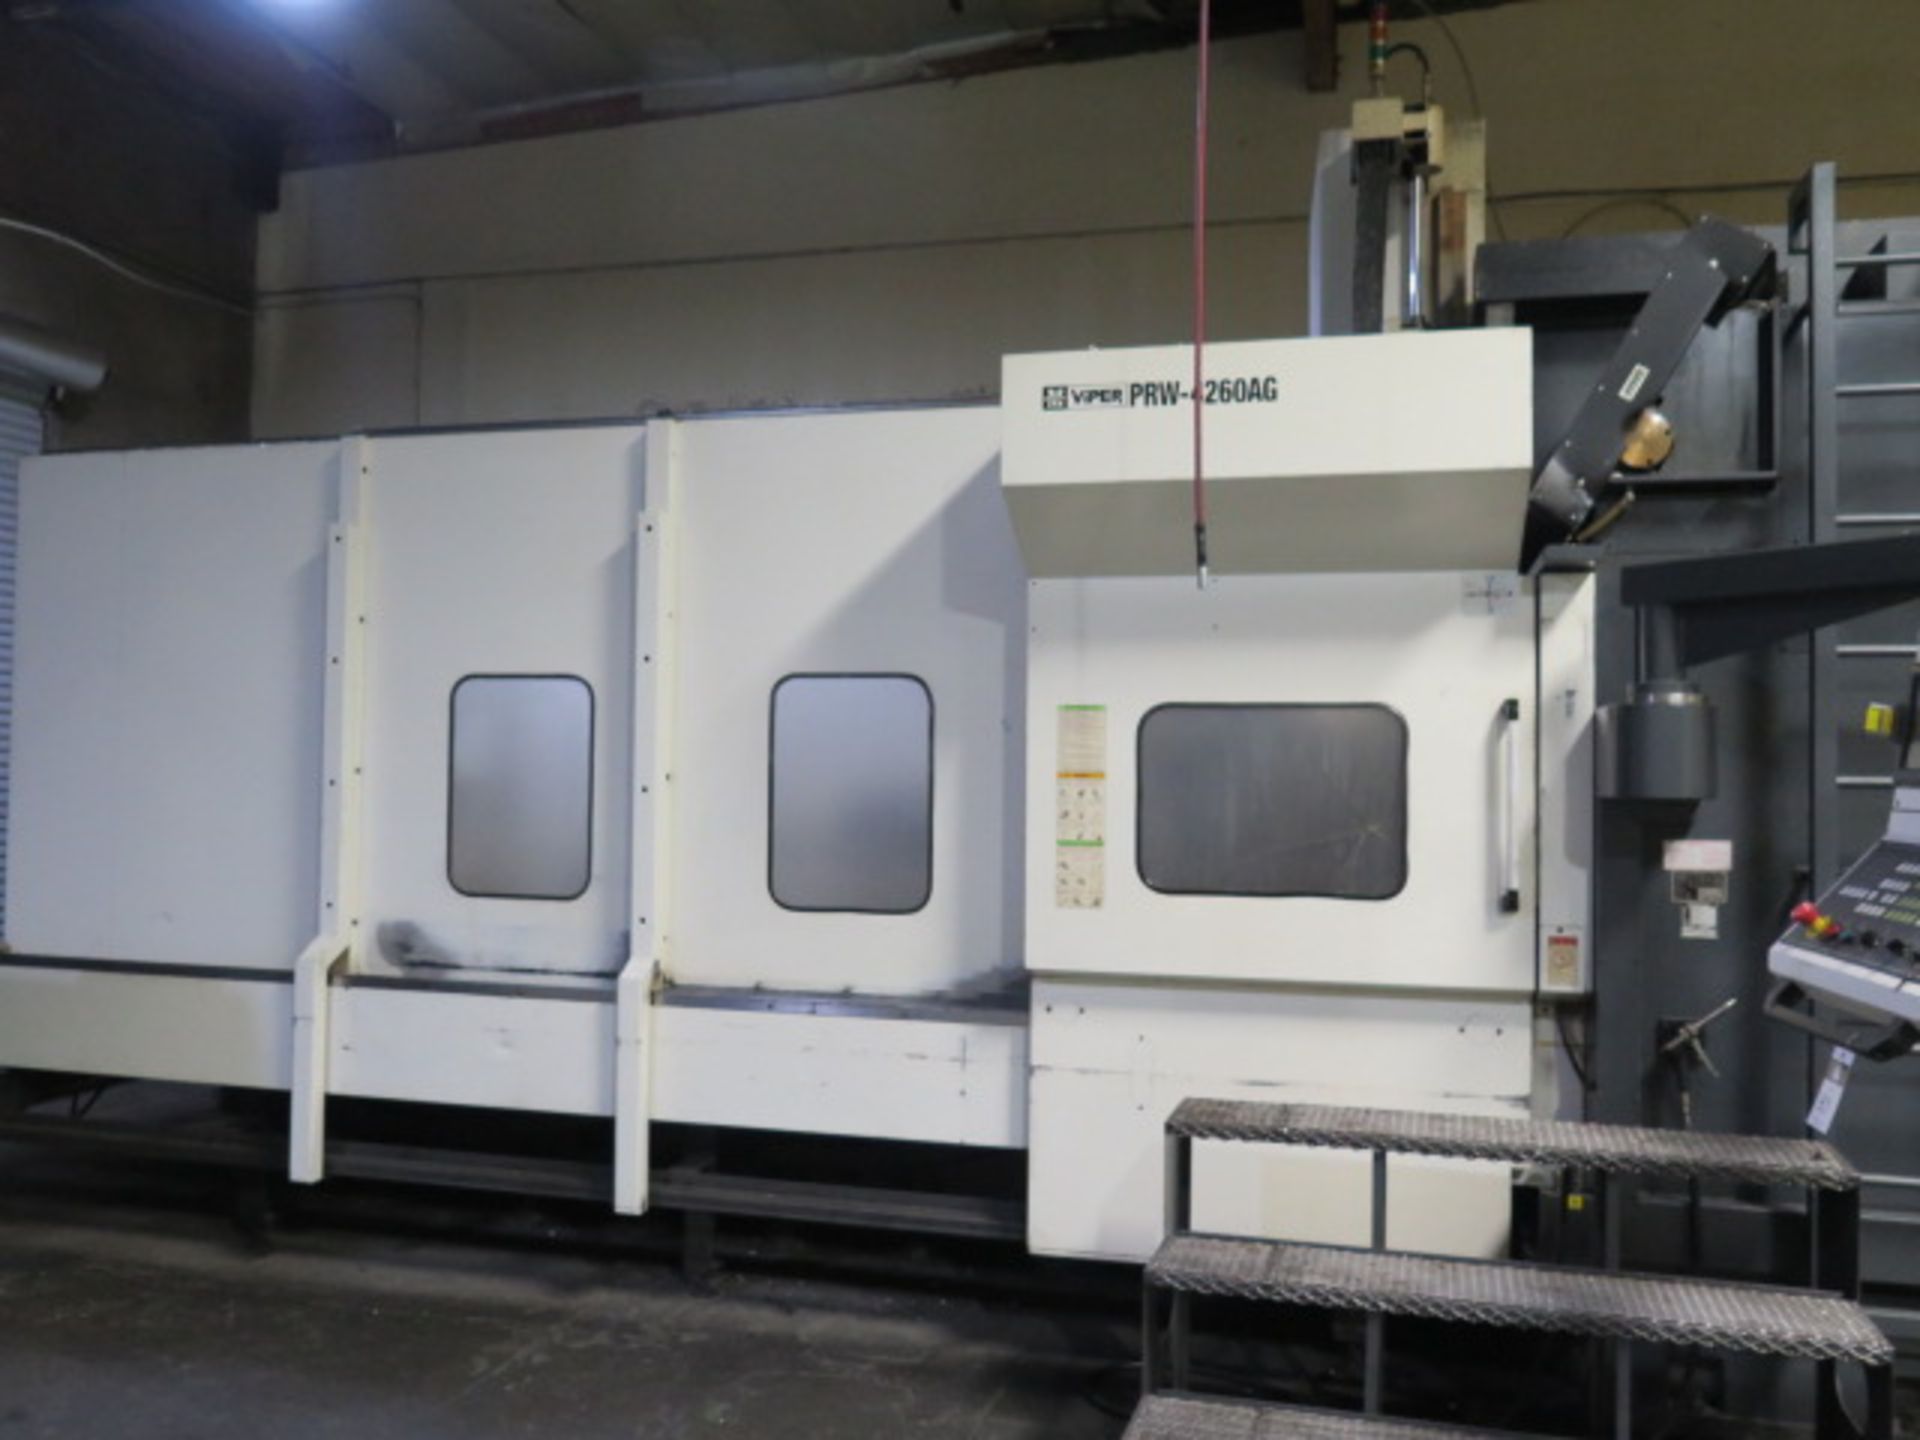 2011 Mighty Viper PRW-426LAG Bridge Style CNC VMC, s/n 016709 w/ Hartrol-Fanuc A1300, SOLD AS IS - Image 4 of 25